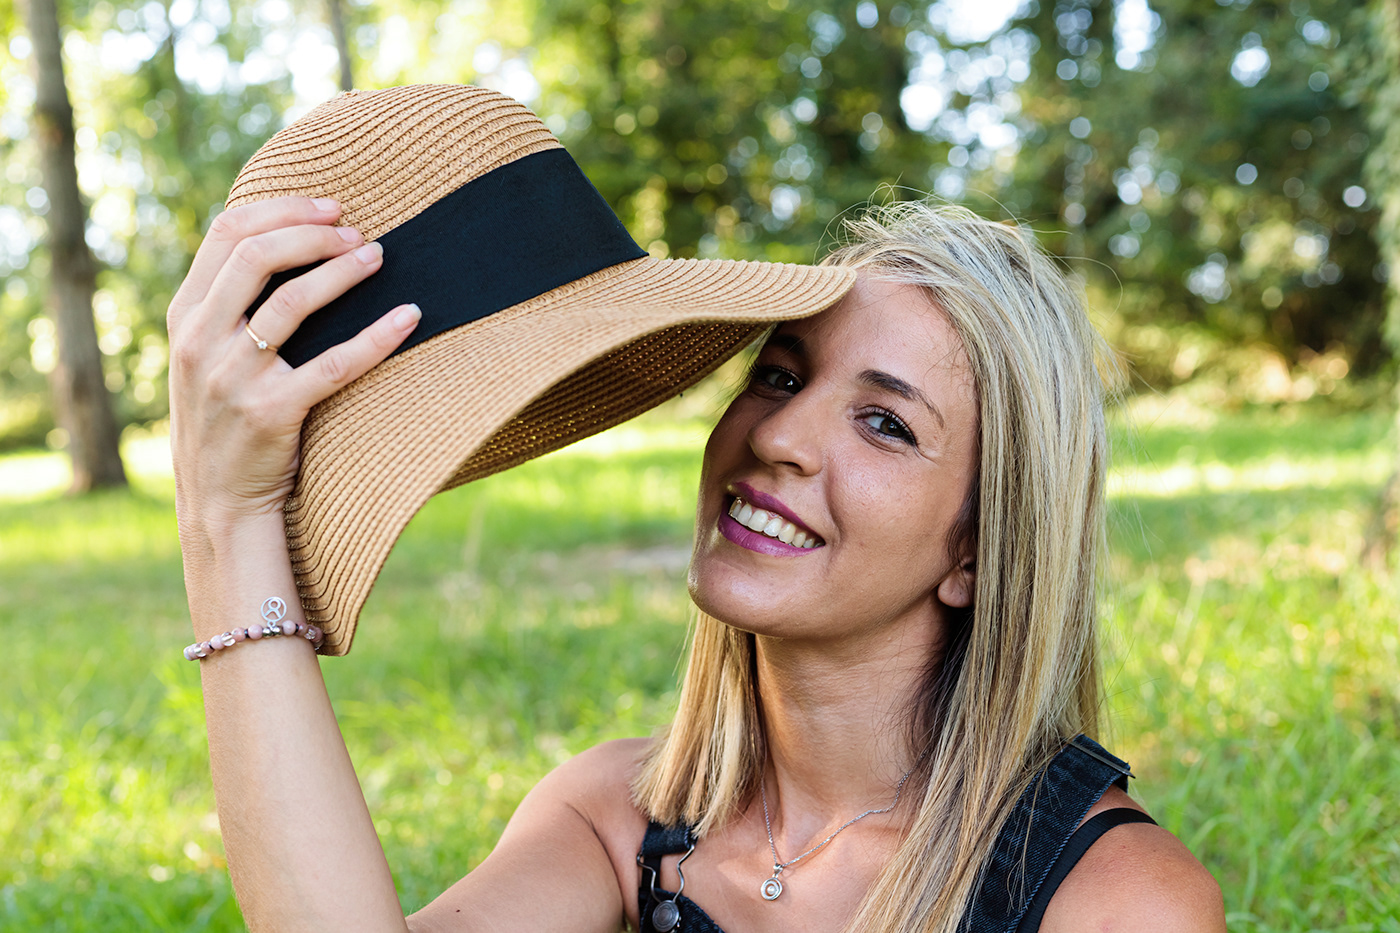 blonde Blue Eyes country hat outside portrait prairie smiling woman young woman